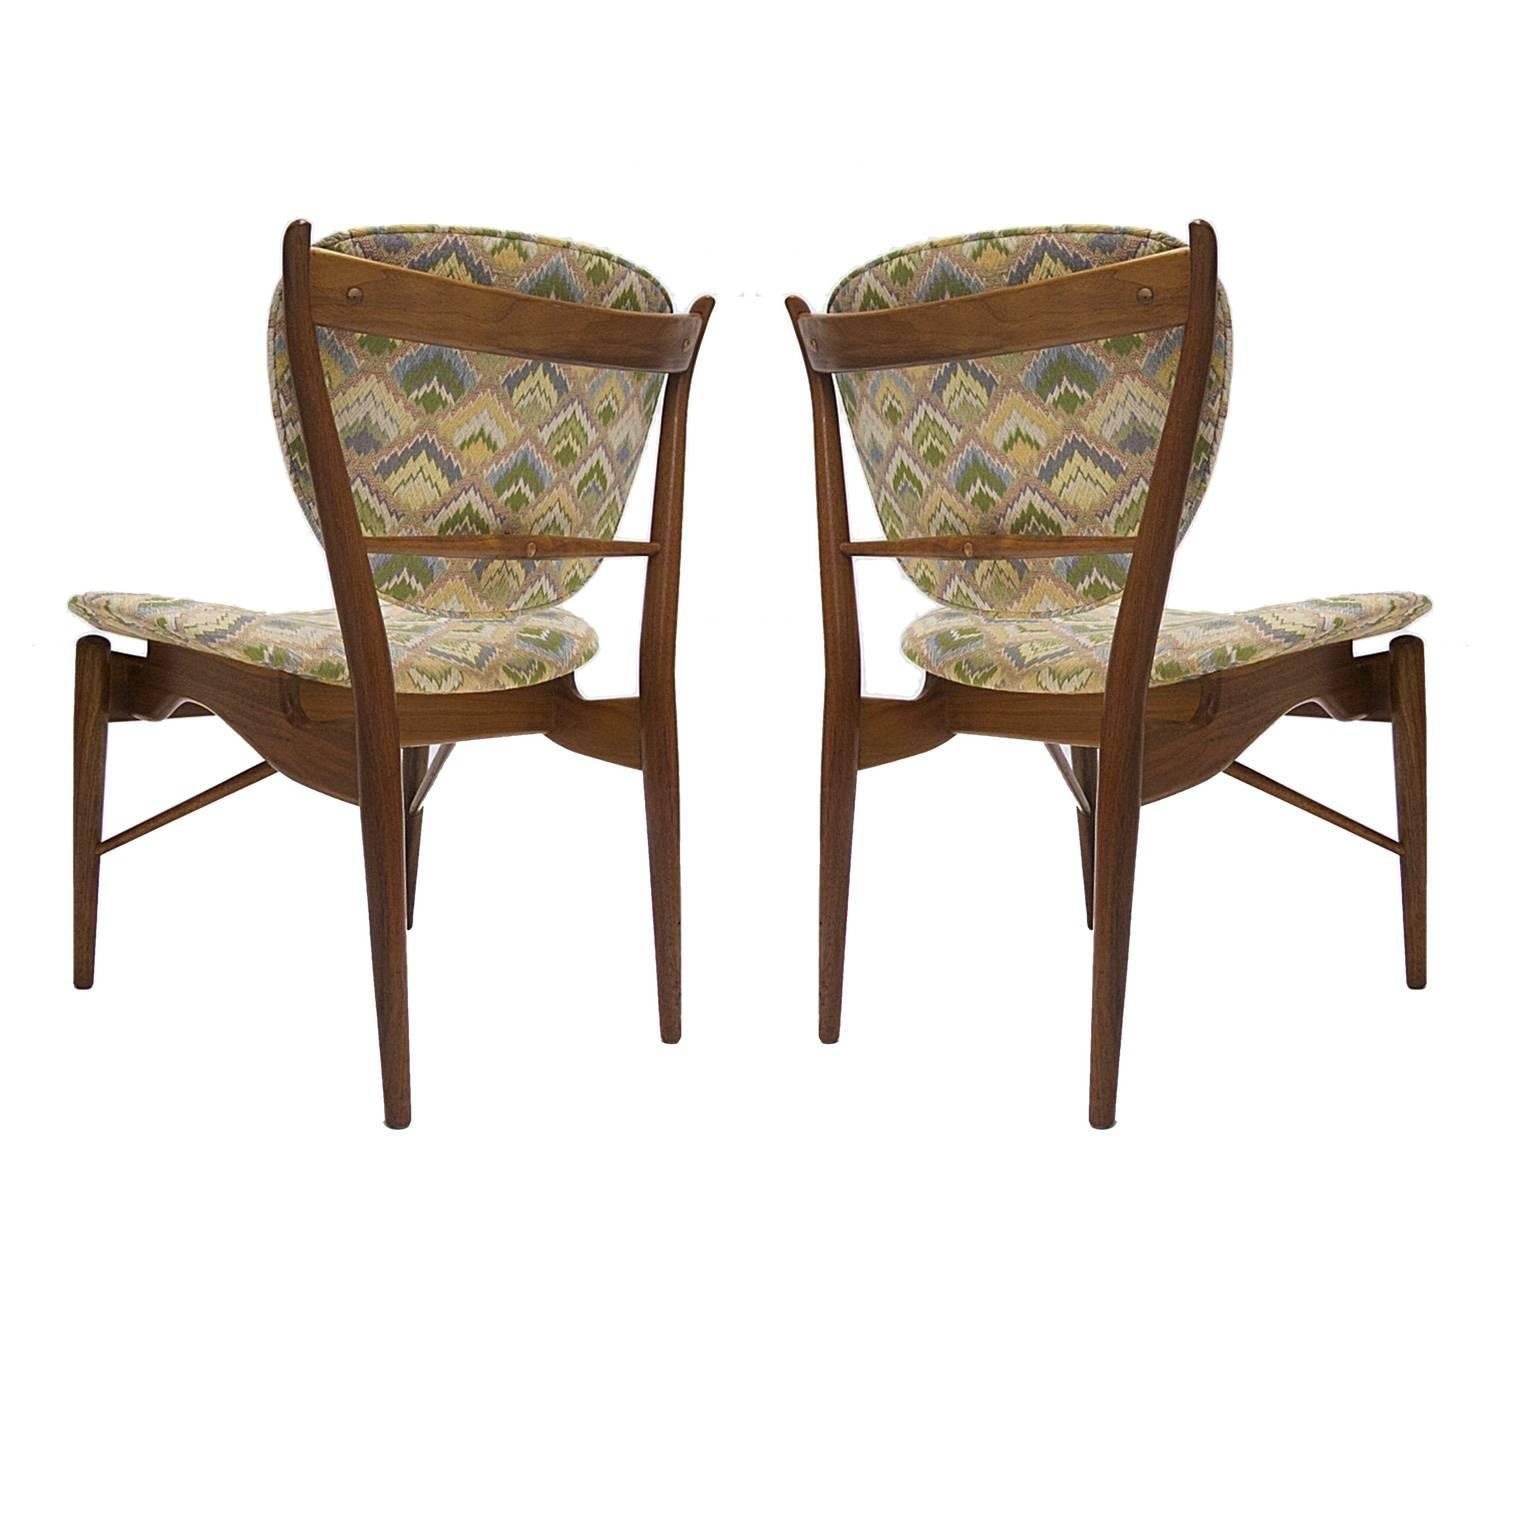 A nice pair of Finn Juhl for Baker Furniture walnut framed chairs. The chairs where reupholstered in a tapestry style fabric at some point.